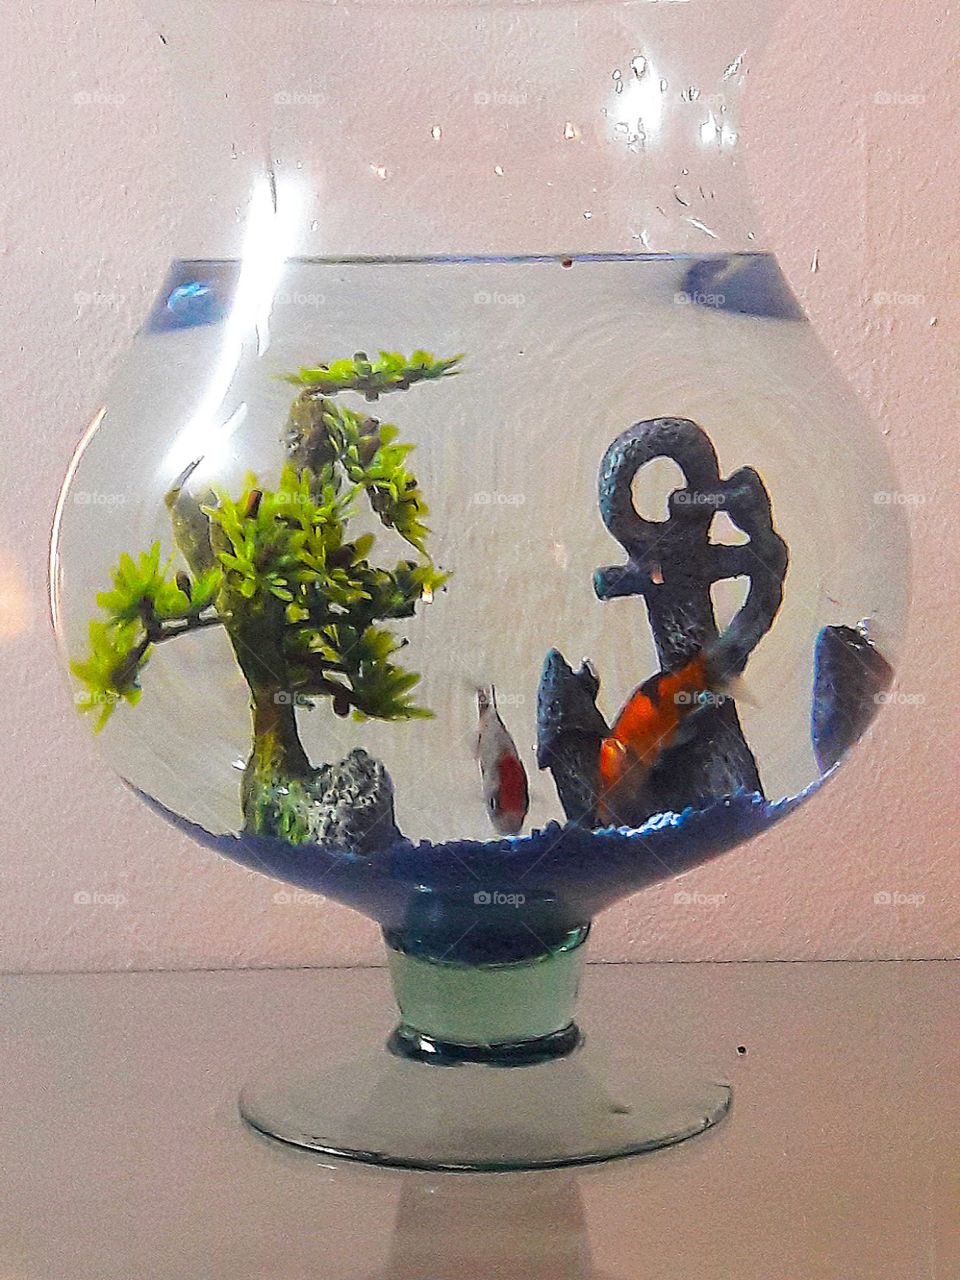 my fishes